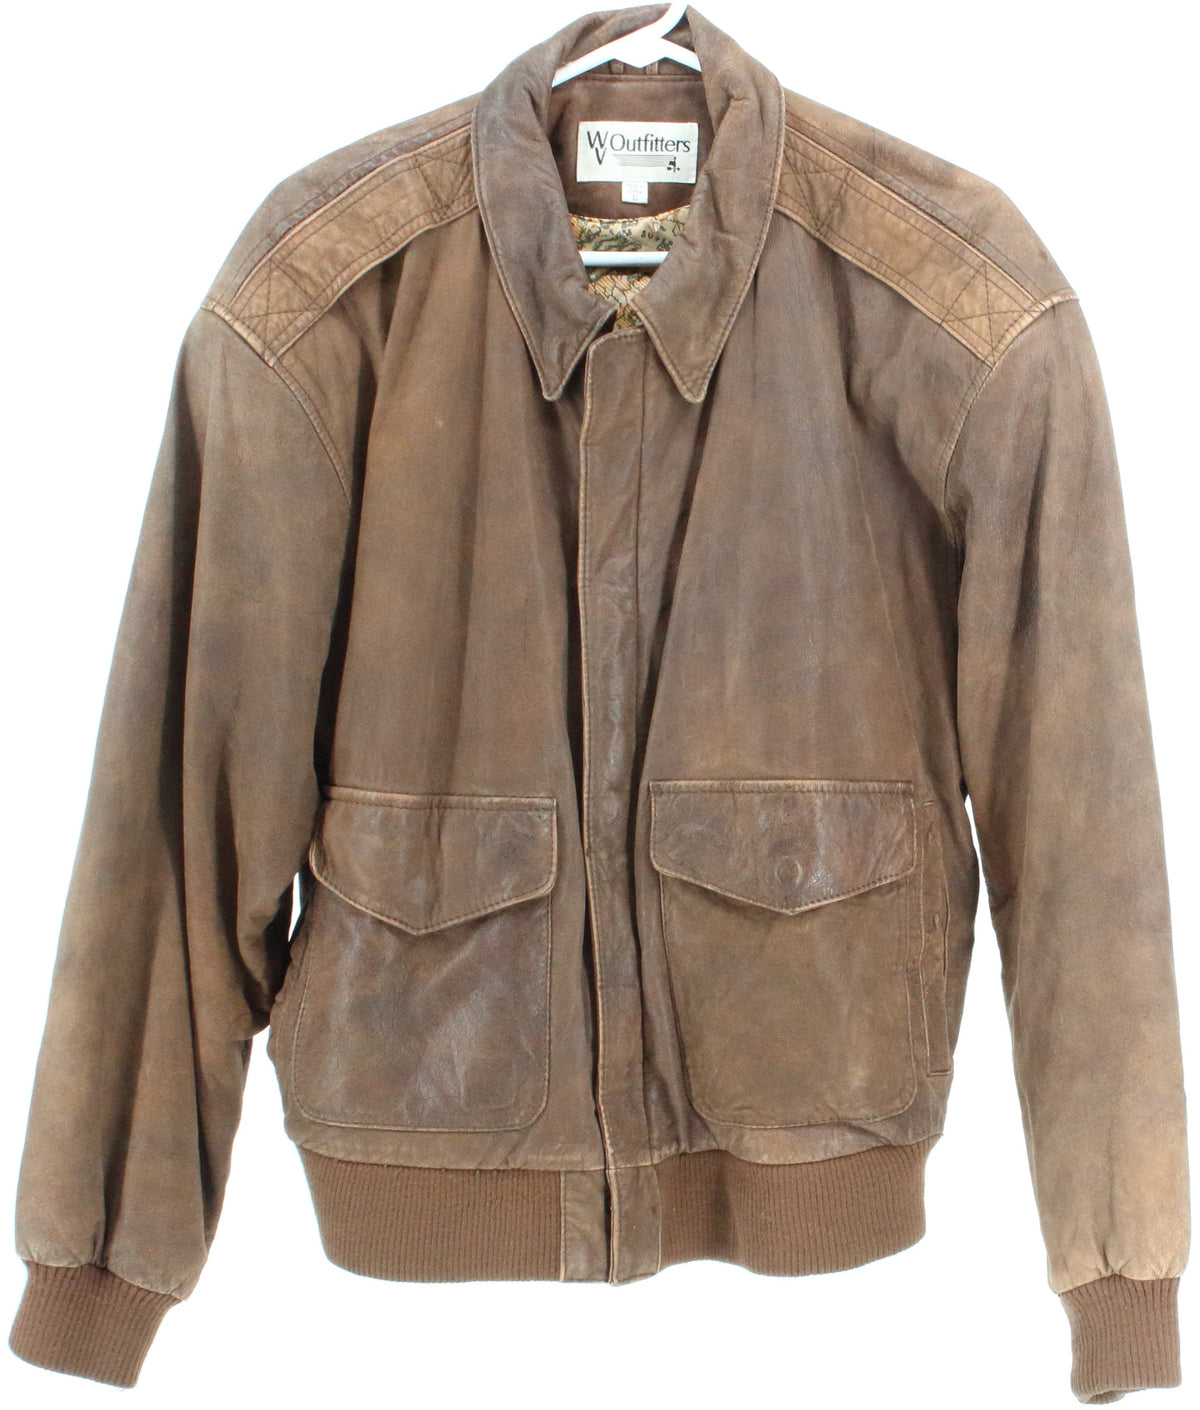 WV Outfitters Brown Leather Jacket